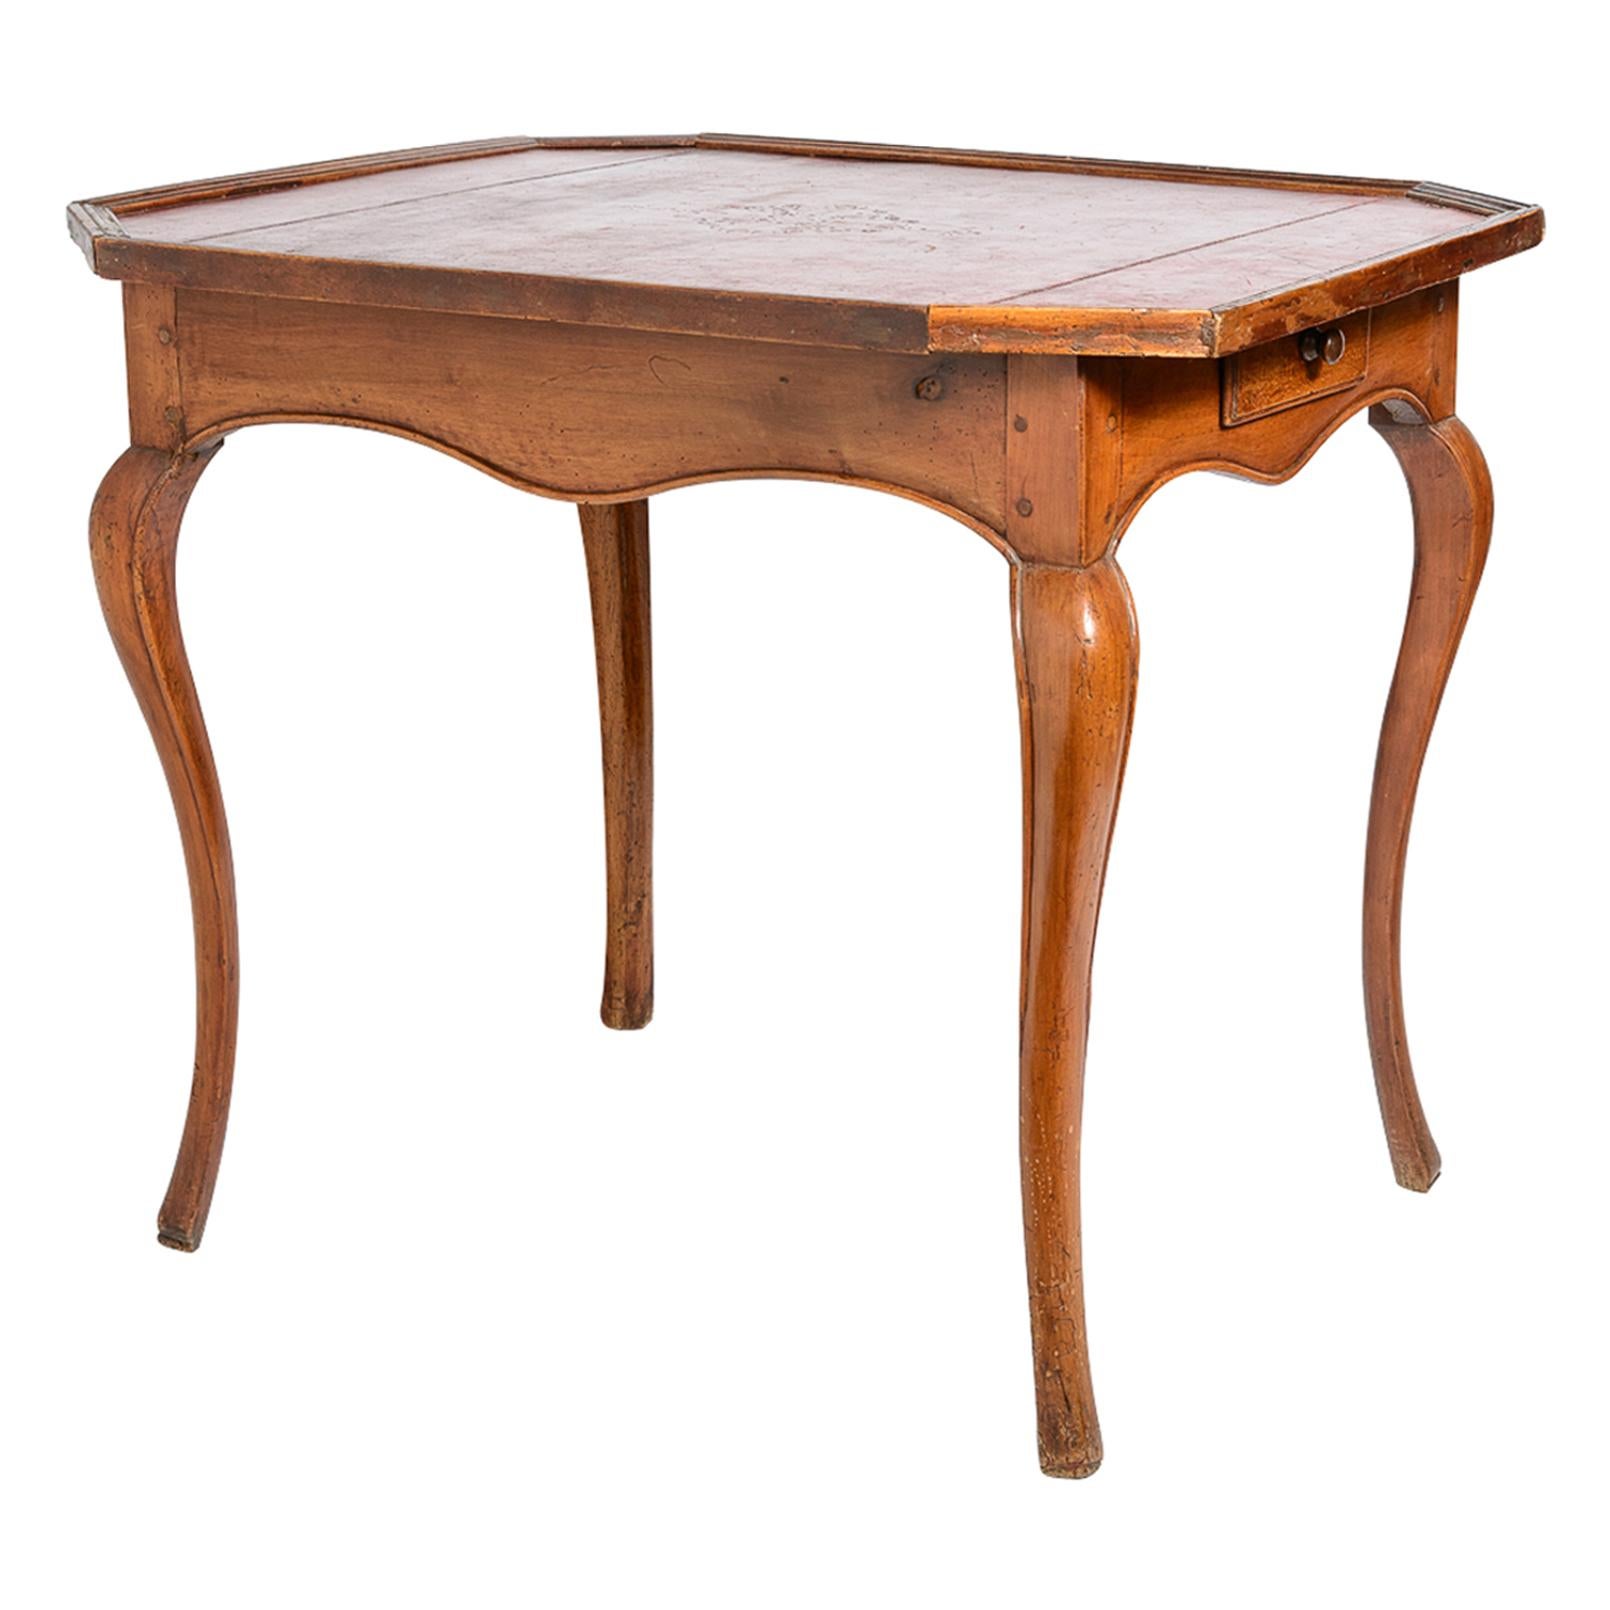 This is a wonderful French Louis XV, 18th C. Game Table With Original Red Leather Top
This table is a rectangular Regence game table of Piquet, circa 1780 from Provence
Four elegant cabriole legs and two drawers.
The leather is embossed in the